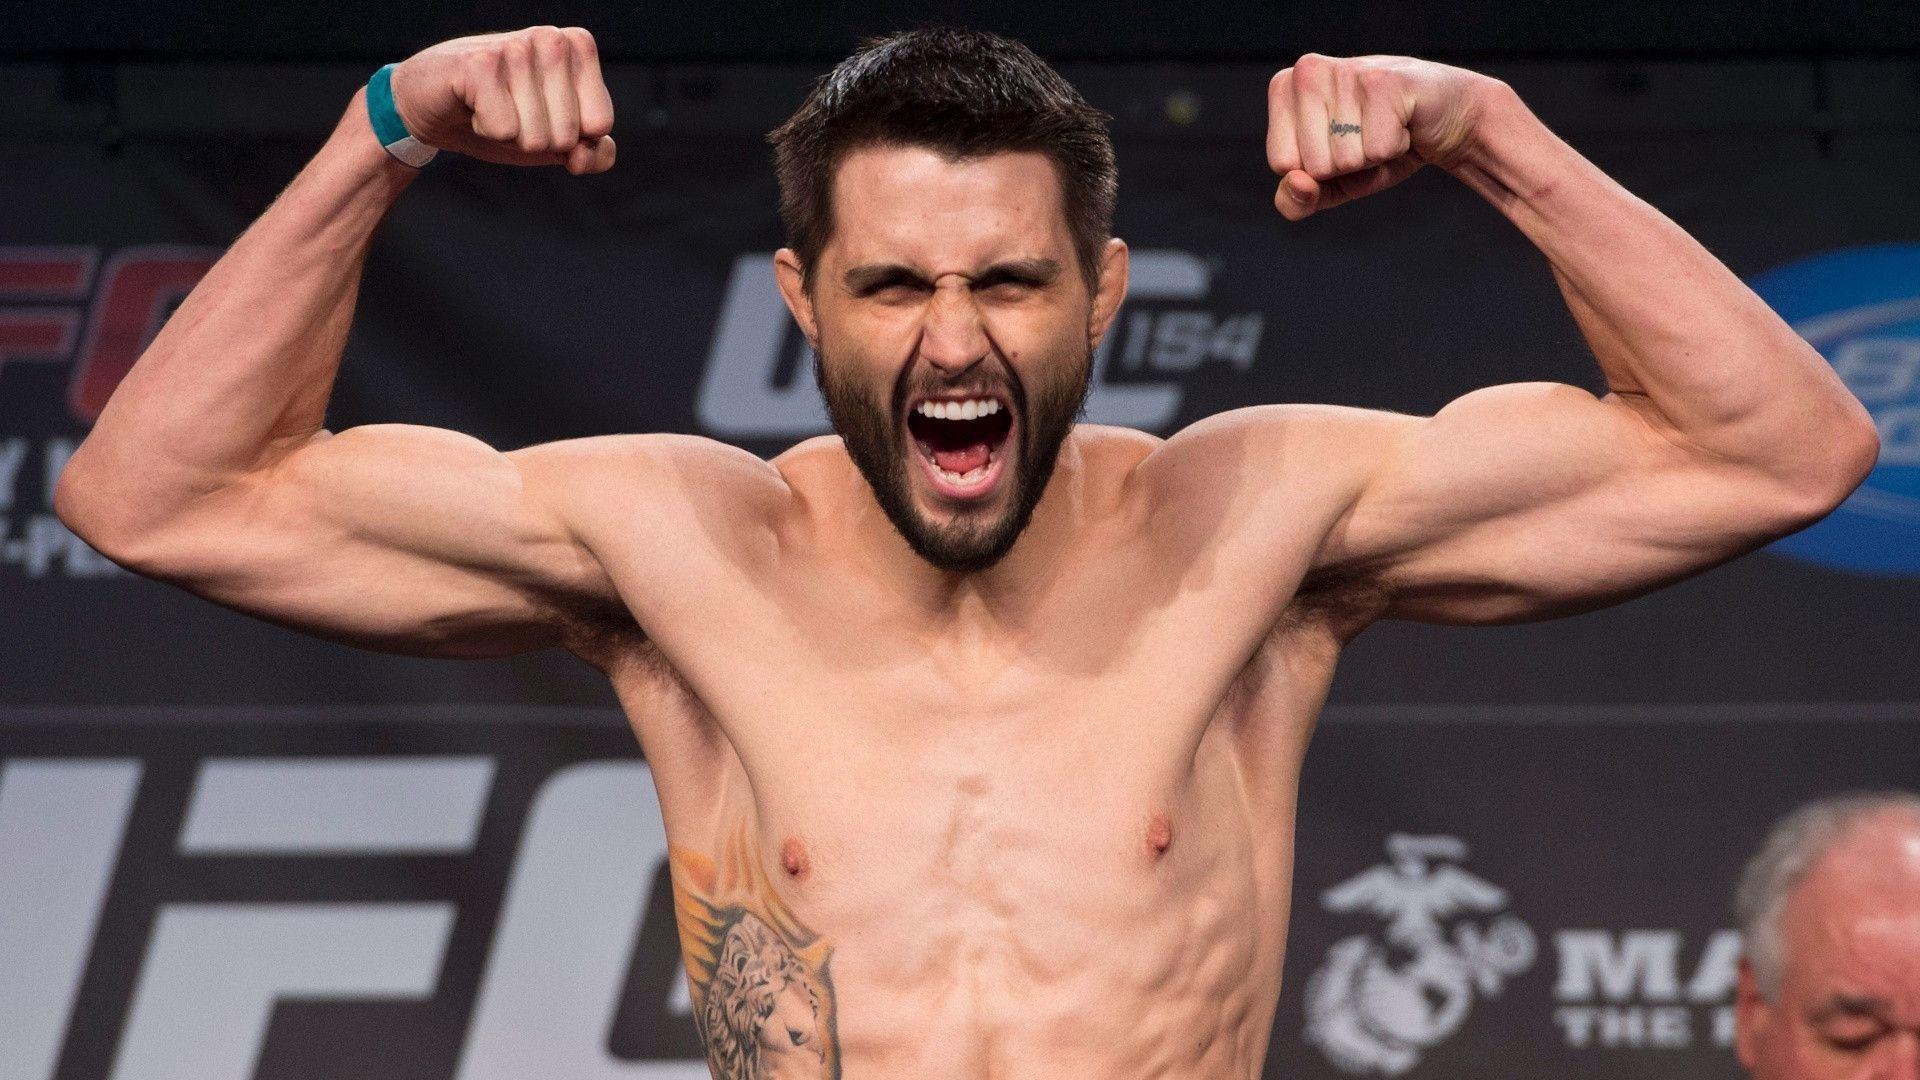 Rock It With Carlos Condit: All Access